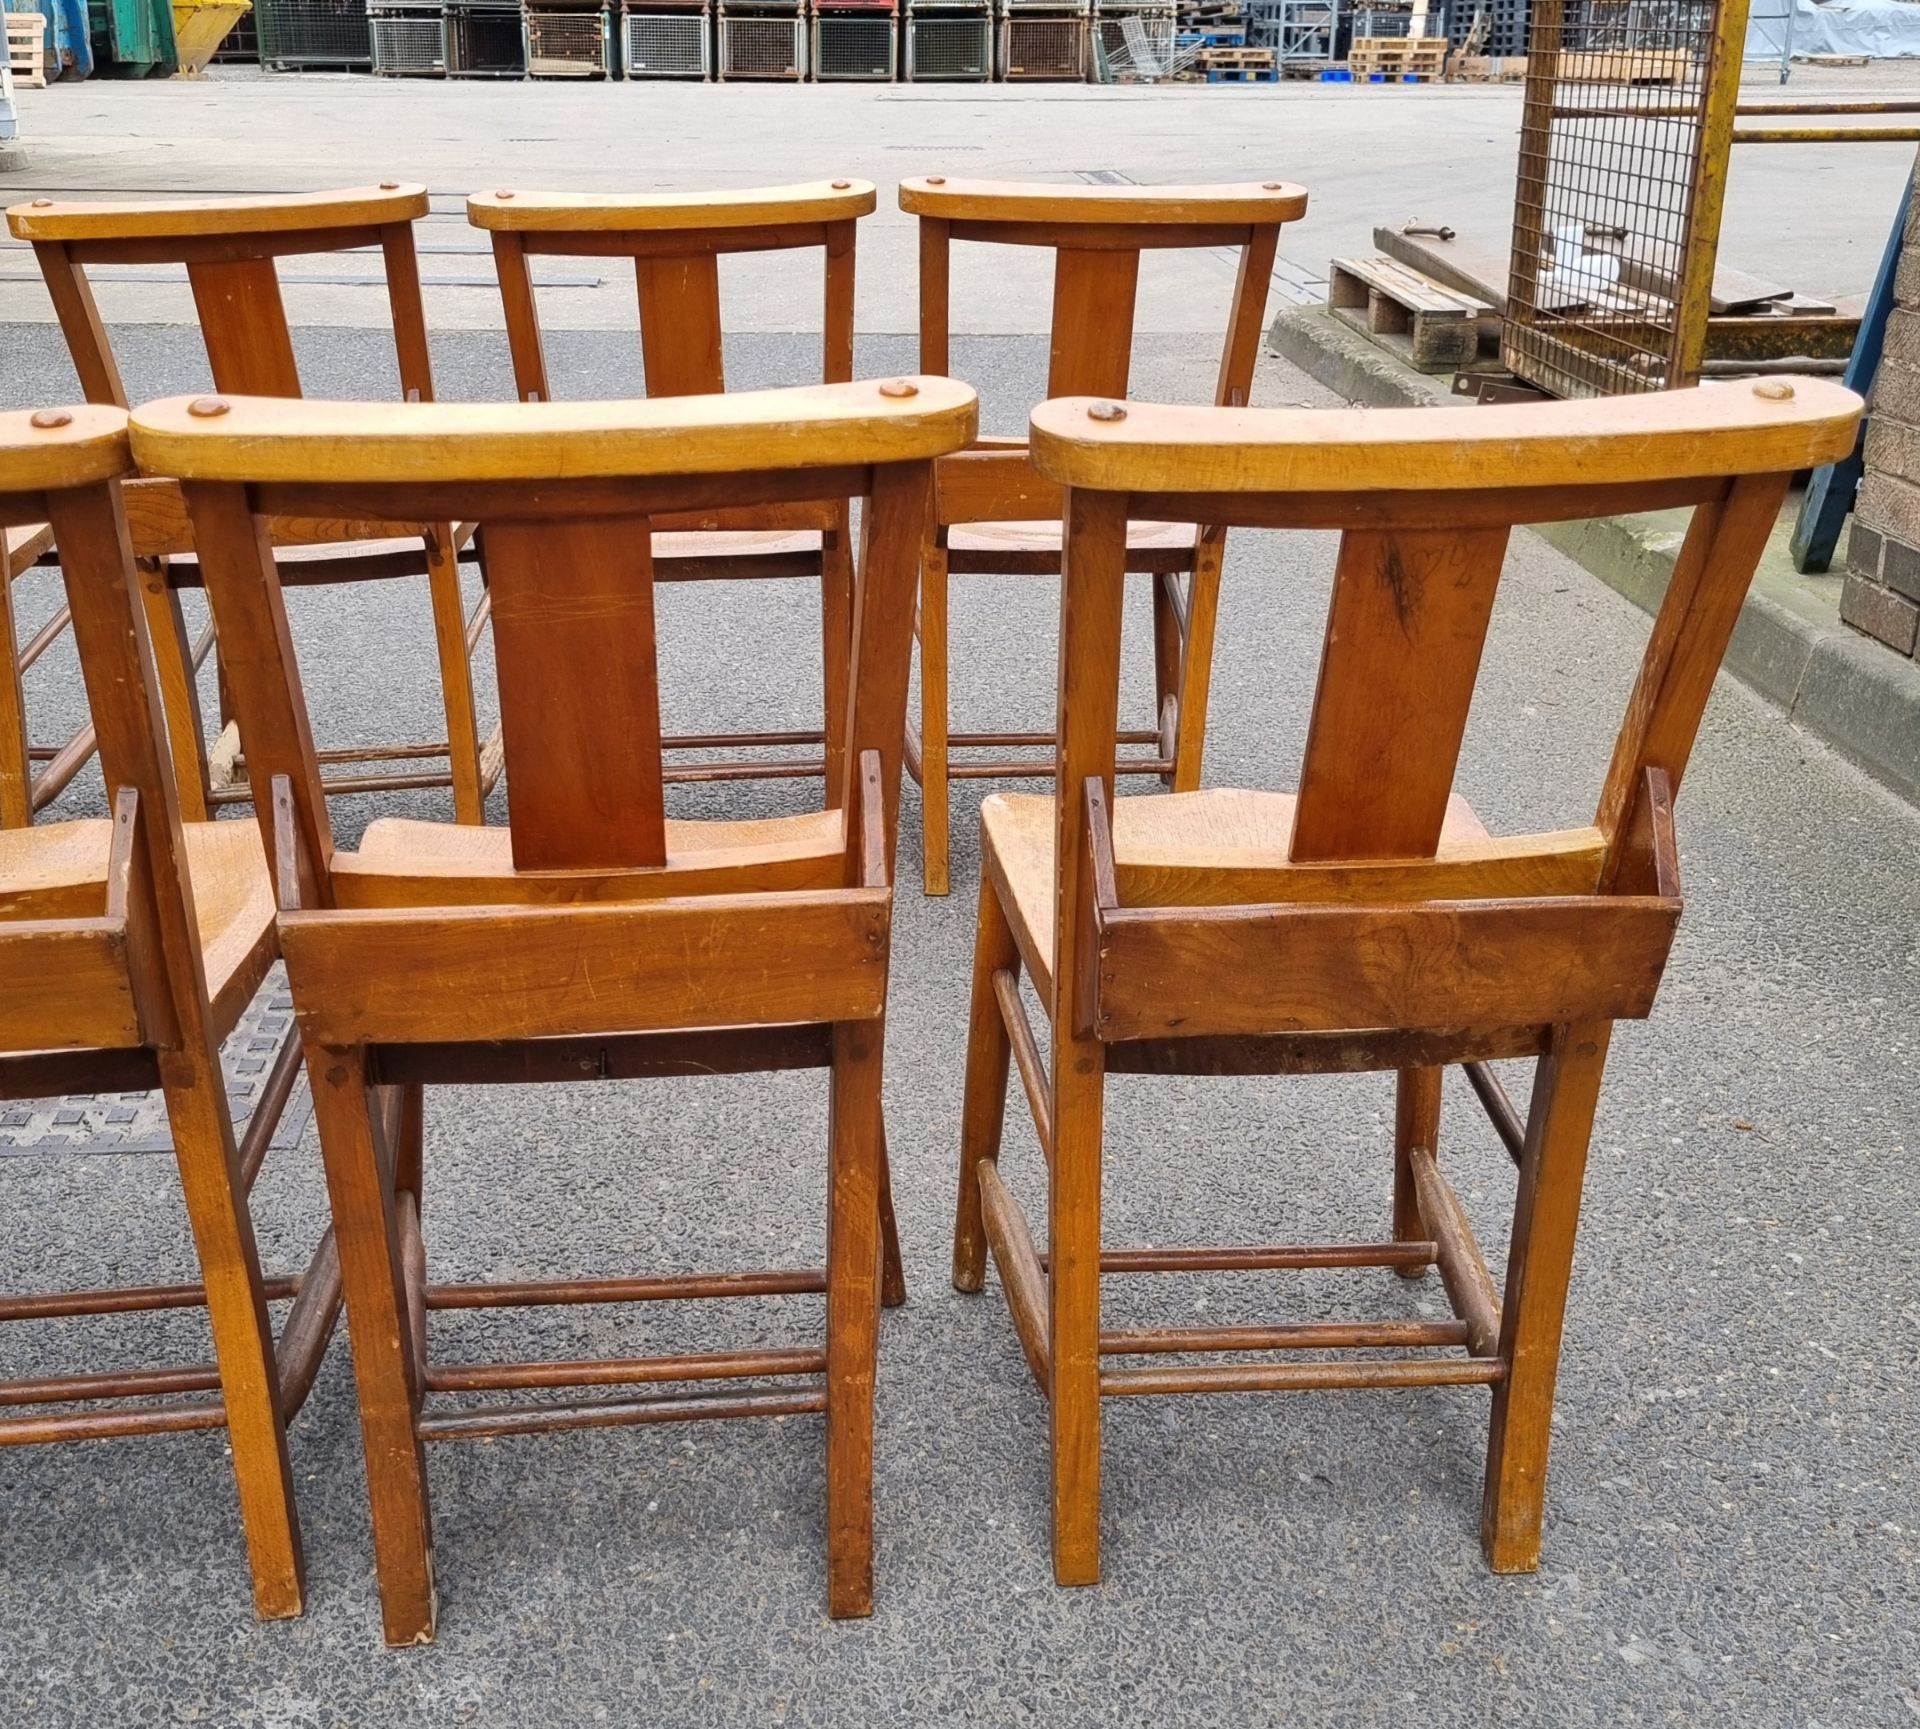 12x Wooden chairs with rear book holder - L 420 x W 420 x H 820mm - Image 6 of 10